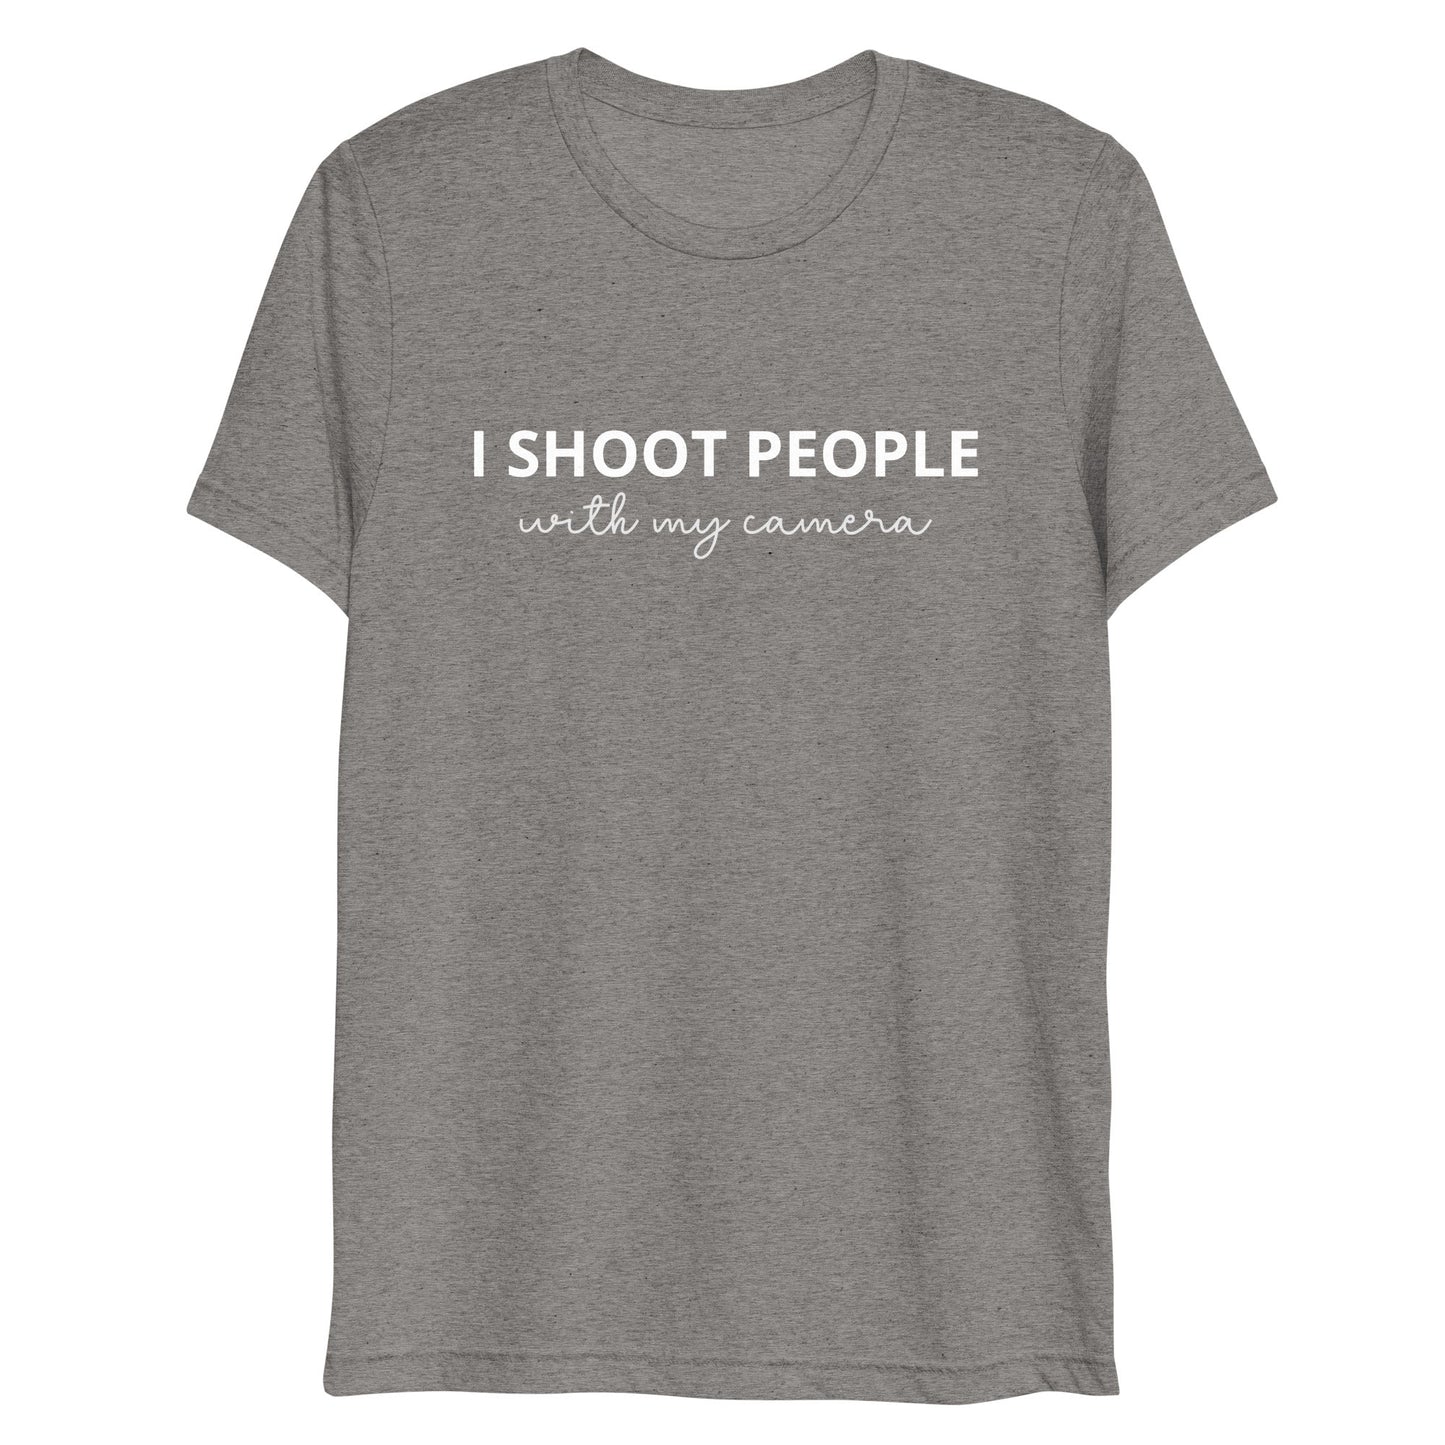 I Shoot People With My Camera T-Shirt,Photographer Shirt,Photography Gift,Studio Gifts,Photography Love Shirt,Photographer Life, Hobby Shirt, Short sleeve t-shirt - ShopJeanPhotography.com